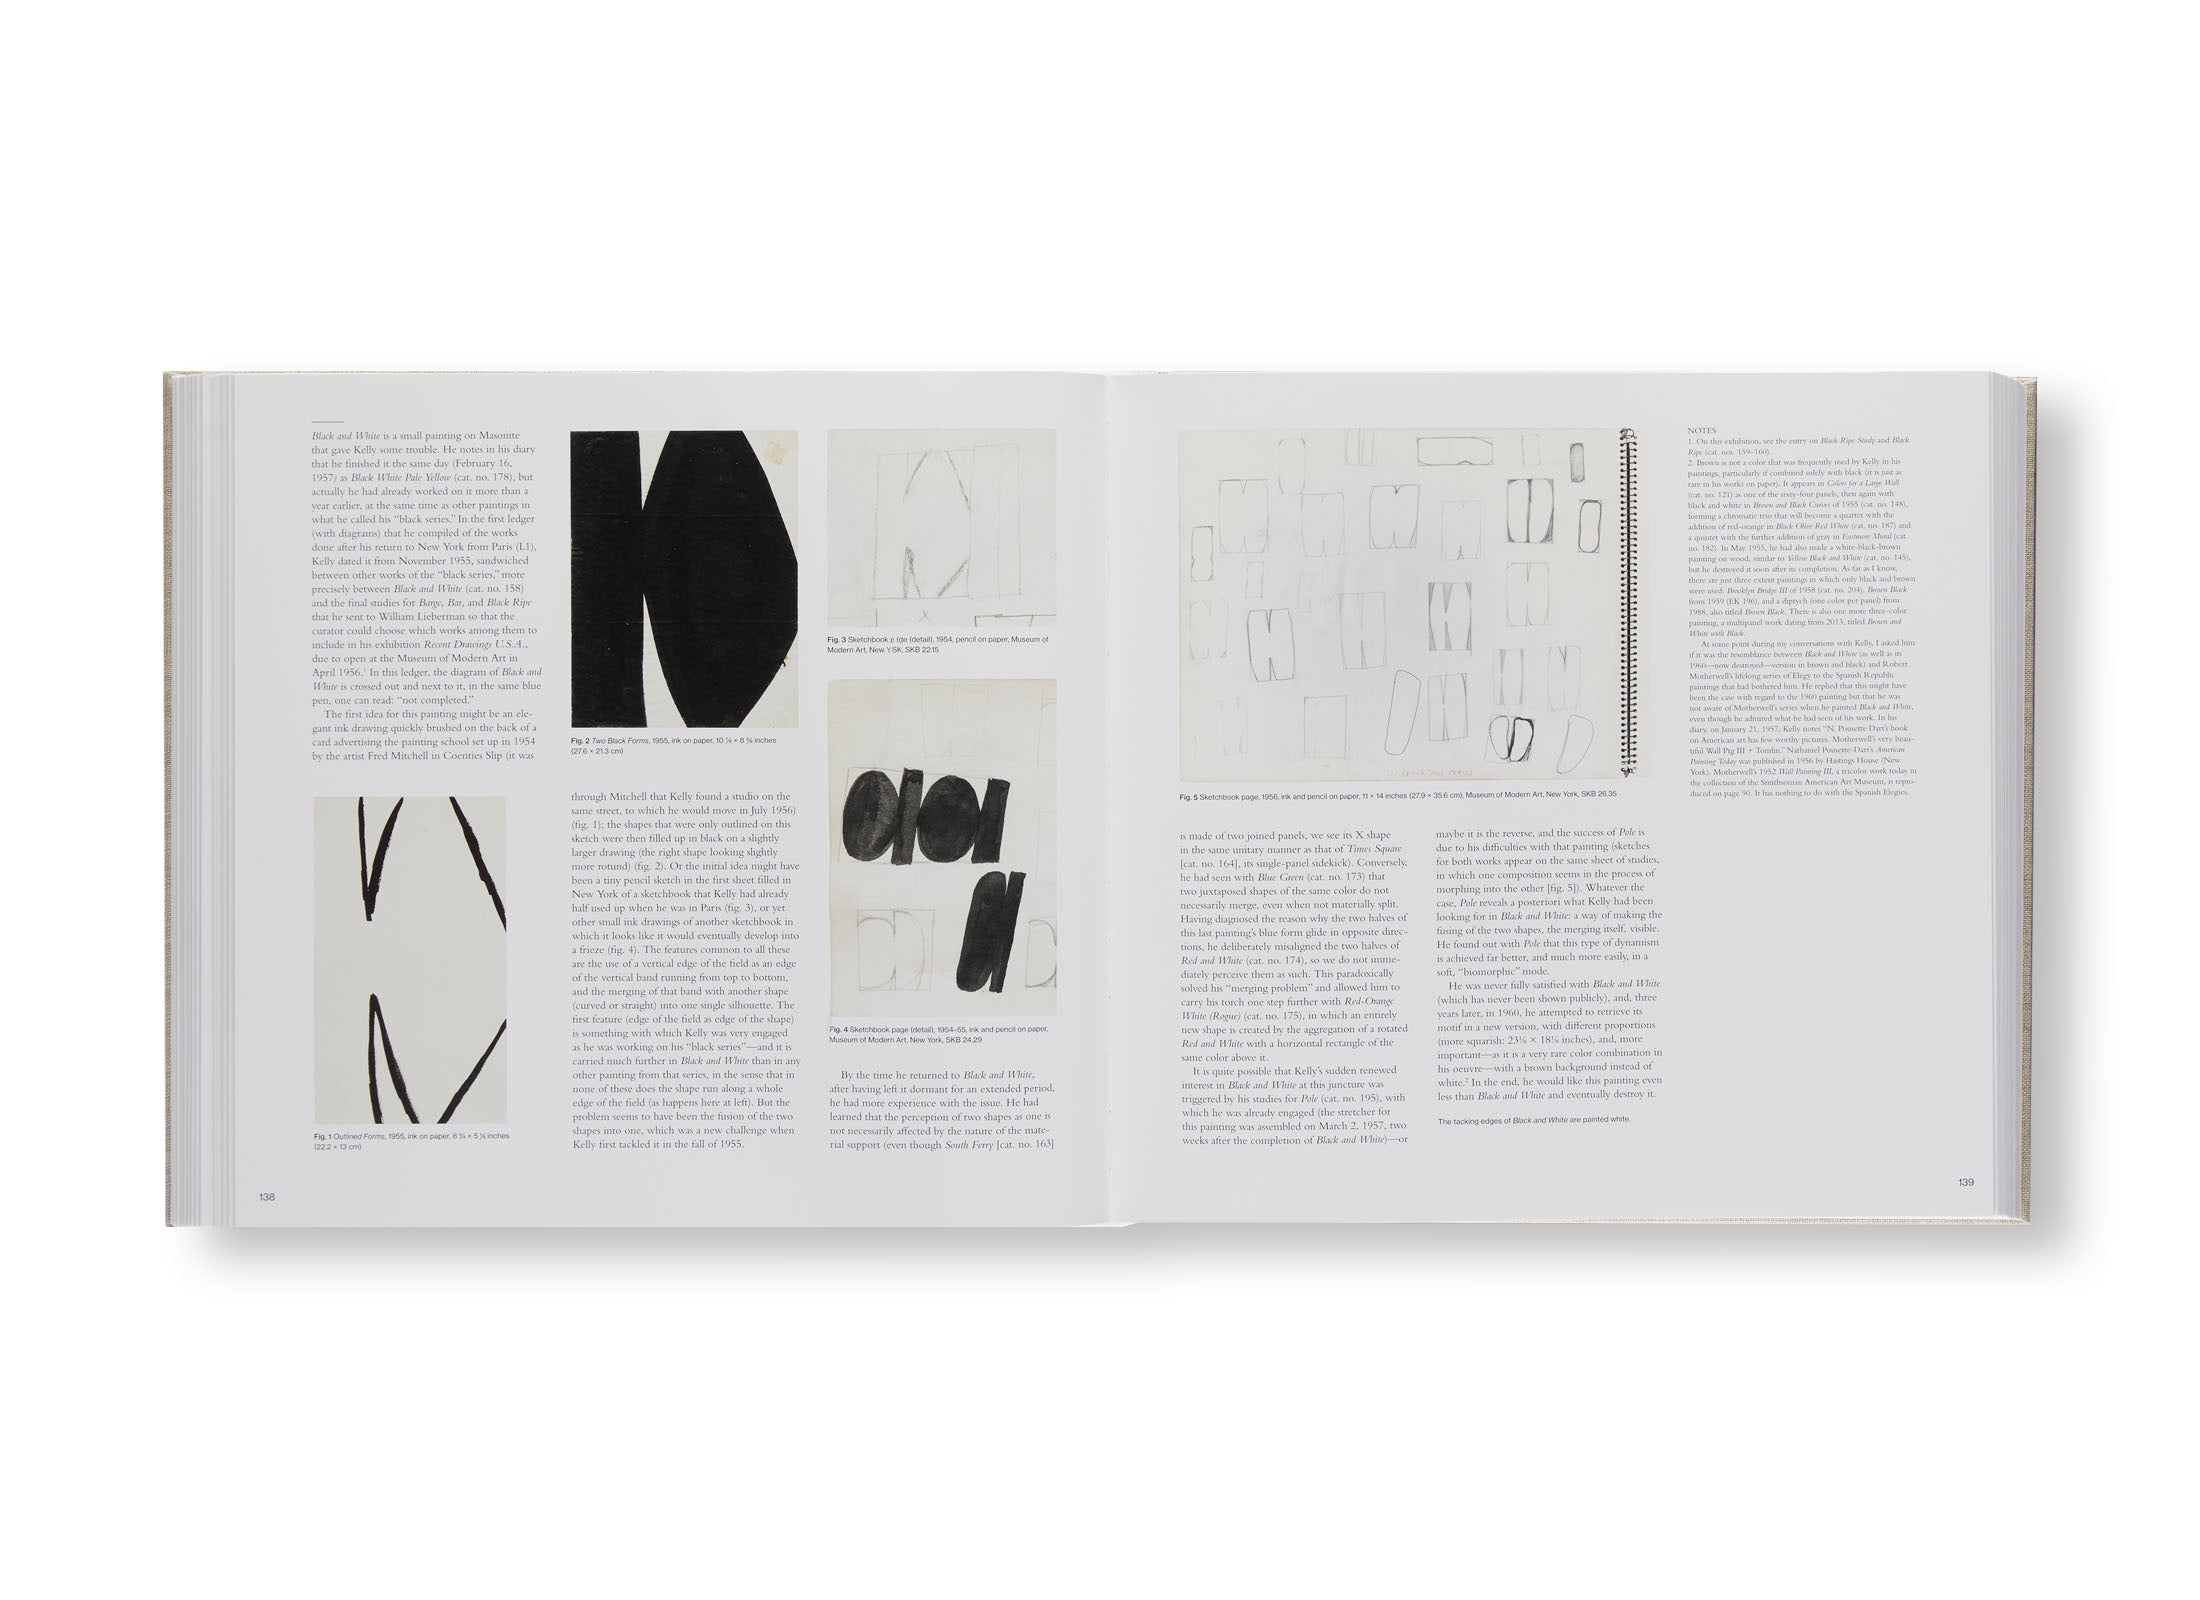 ELLSWORTH KELLY, CATALOGUE RAISONNÉ OF PAINTINGS, RELIEFS AND SCULPTURE, VOLUME TWO, 1954-1958 by Ellsworth Kelly